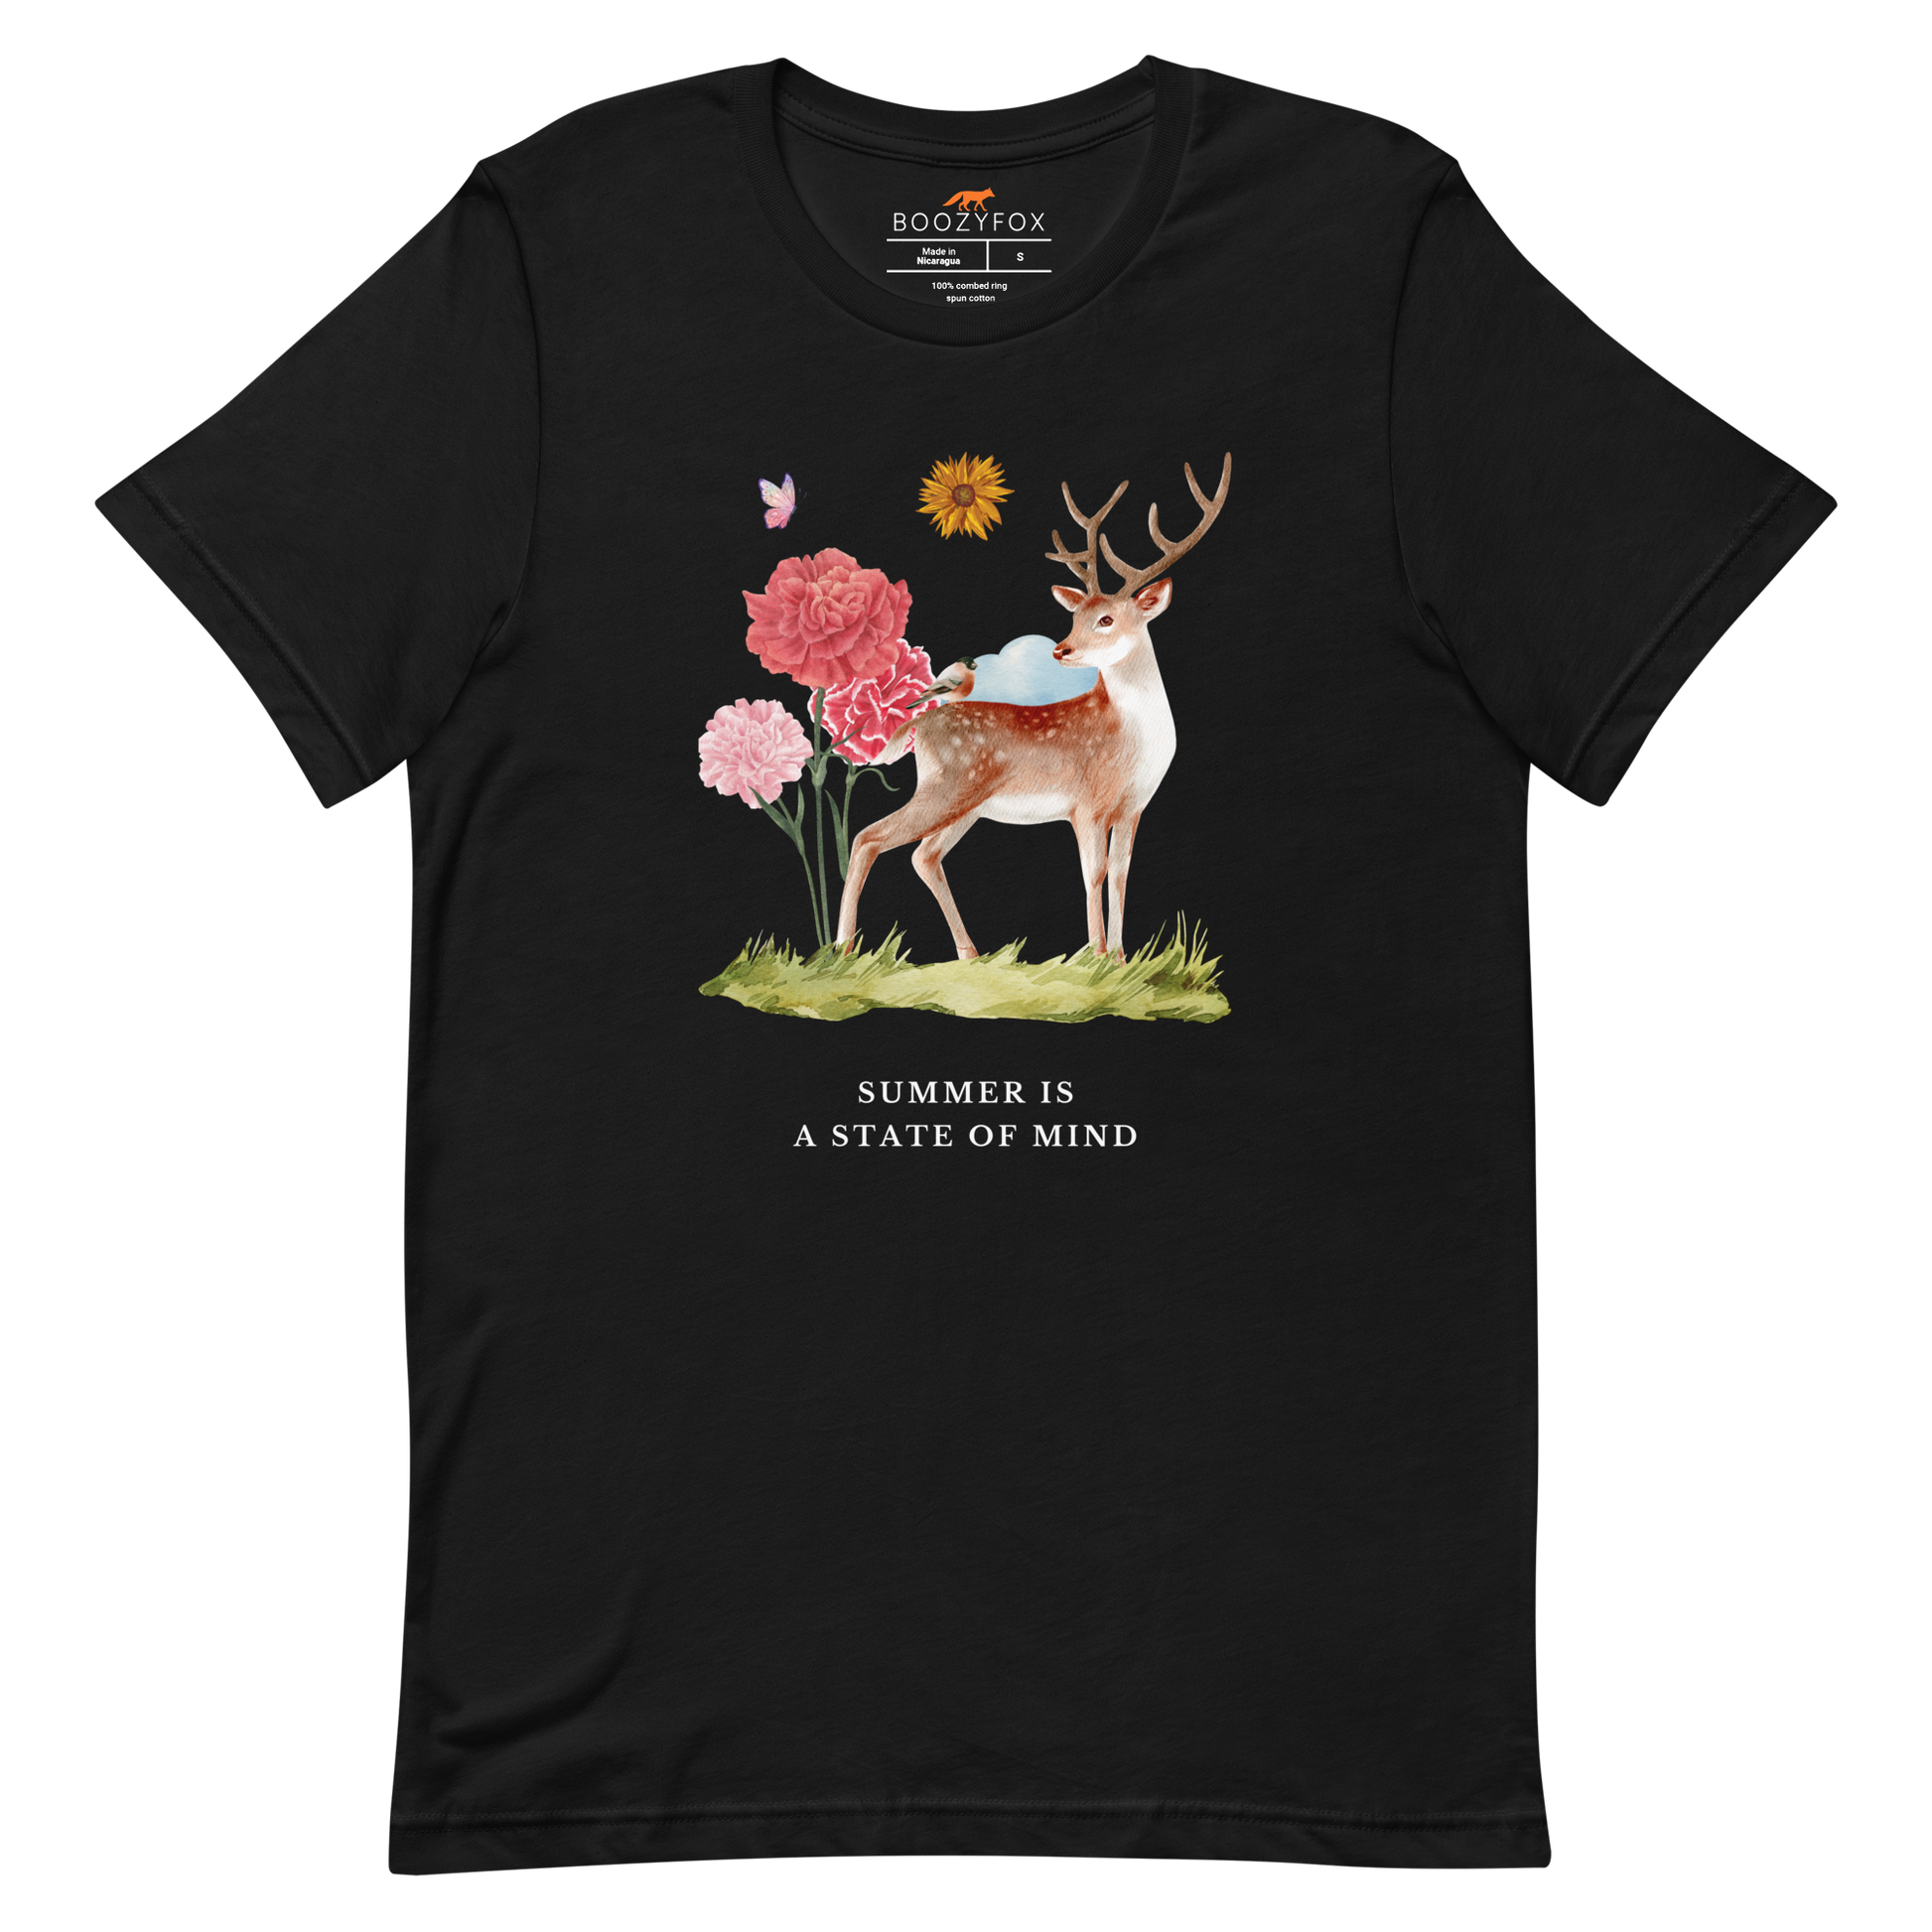 Black Premium Summer Is a State of Mind Tee featuring a Summer Is a State of Mind graphic on the chest - Cute Graphic Summer Tees - Boozy Fox